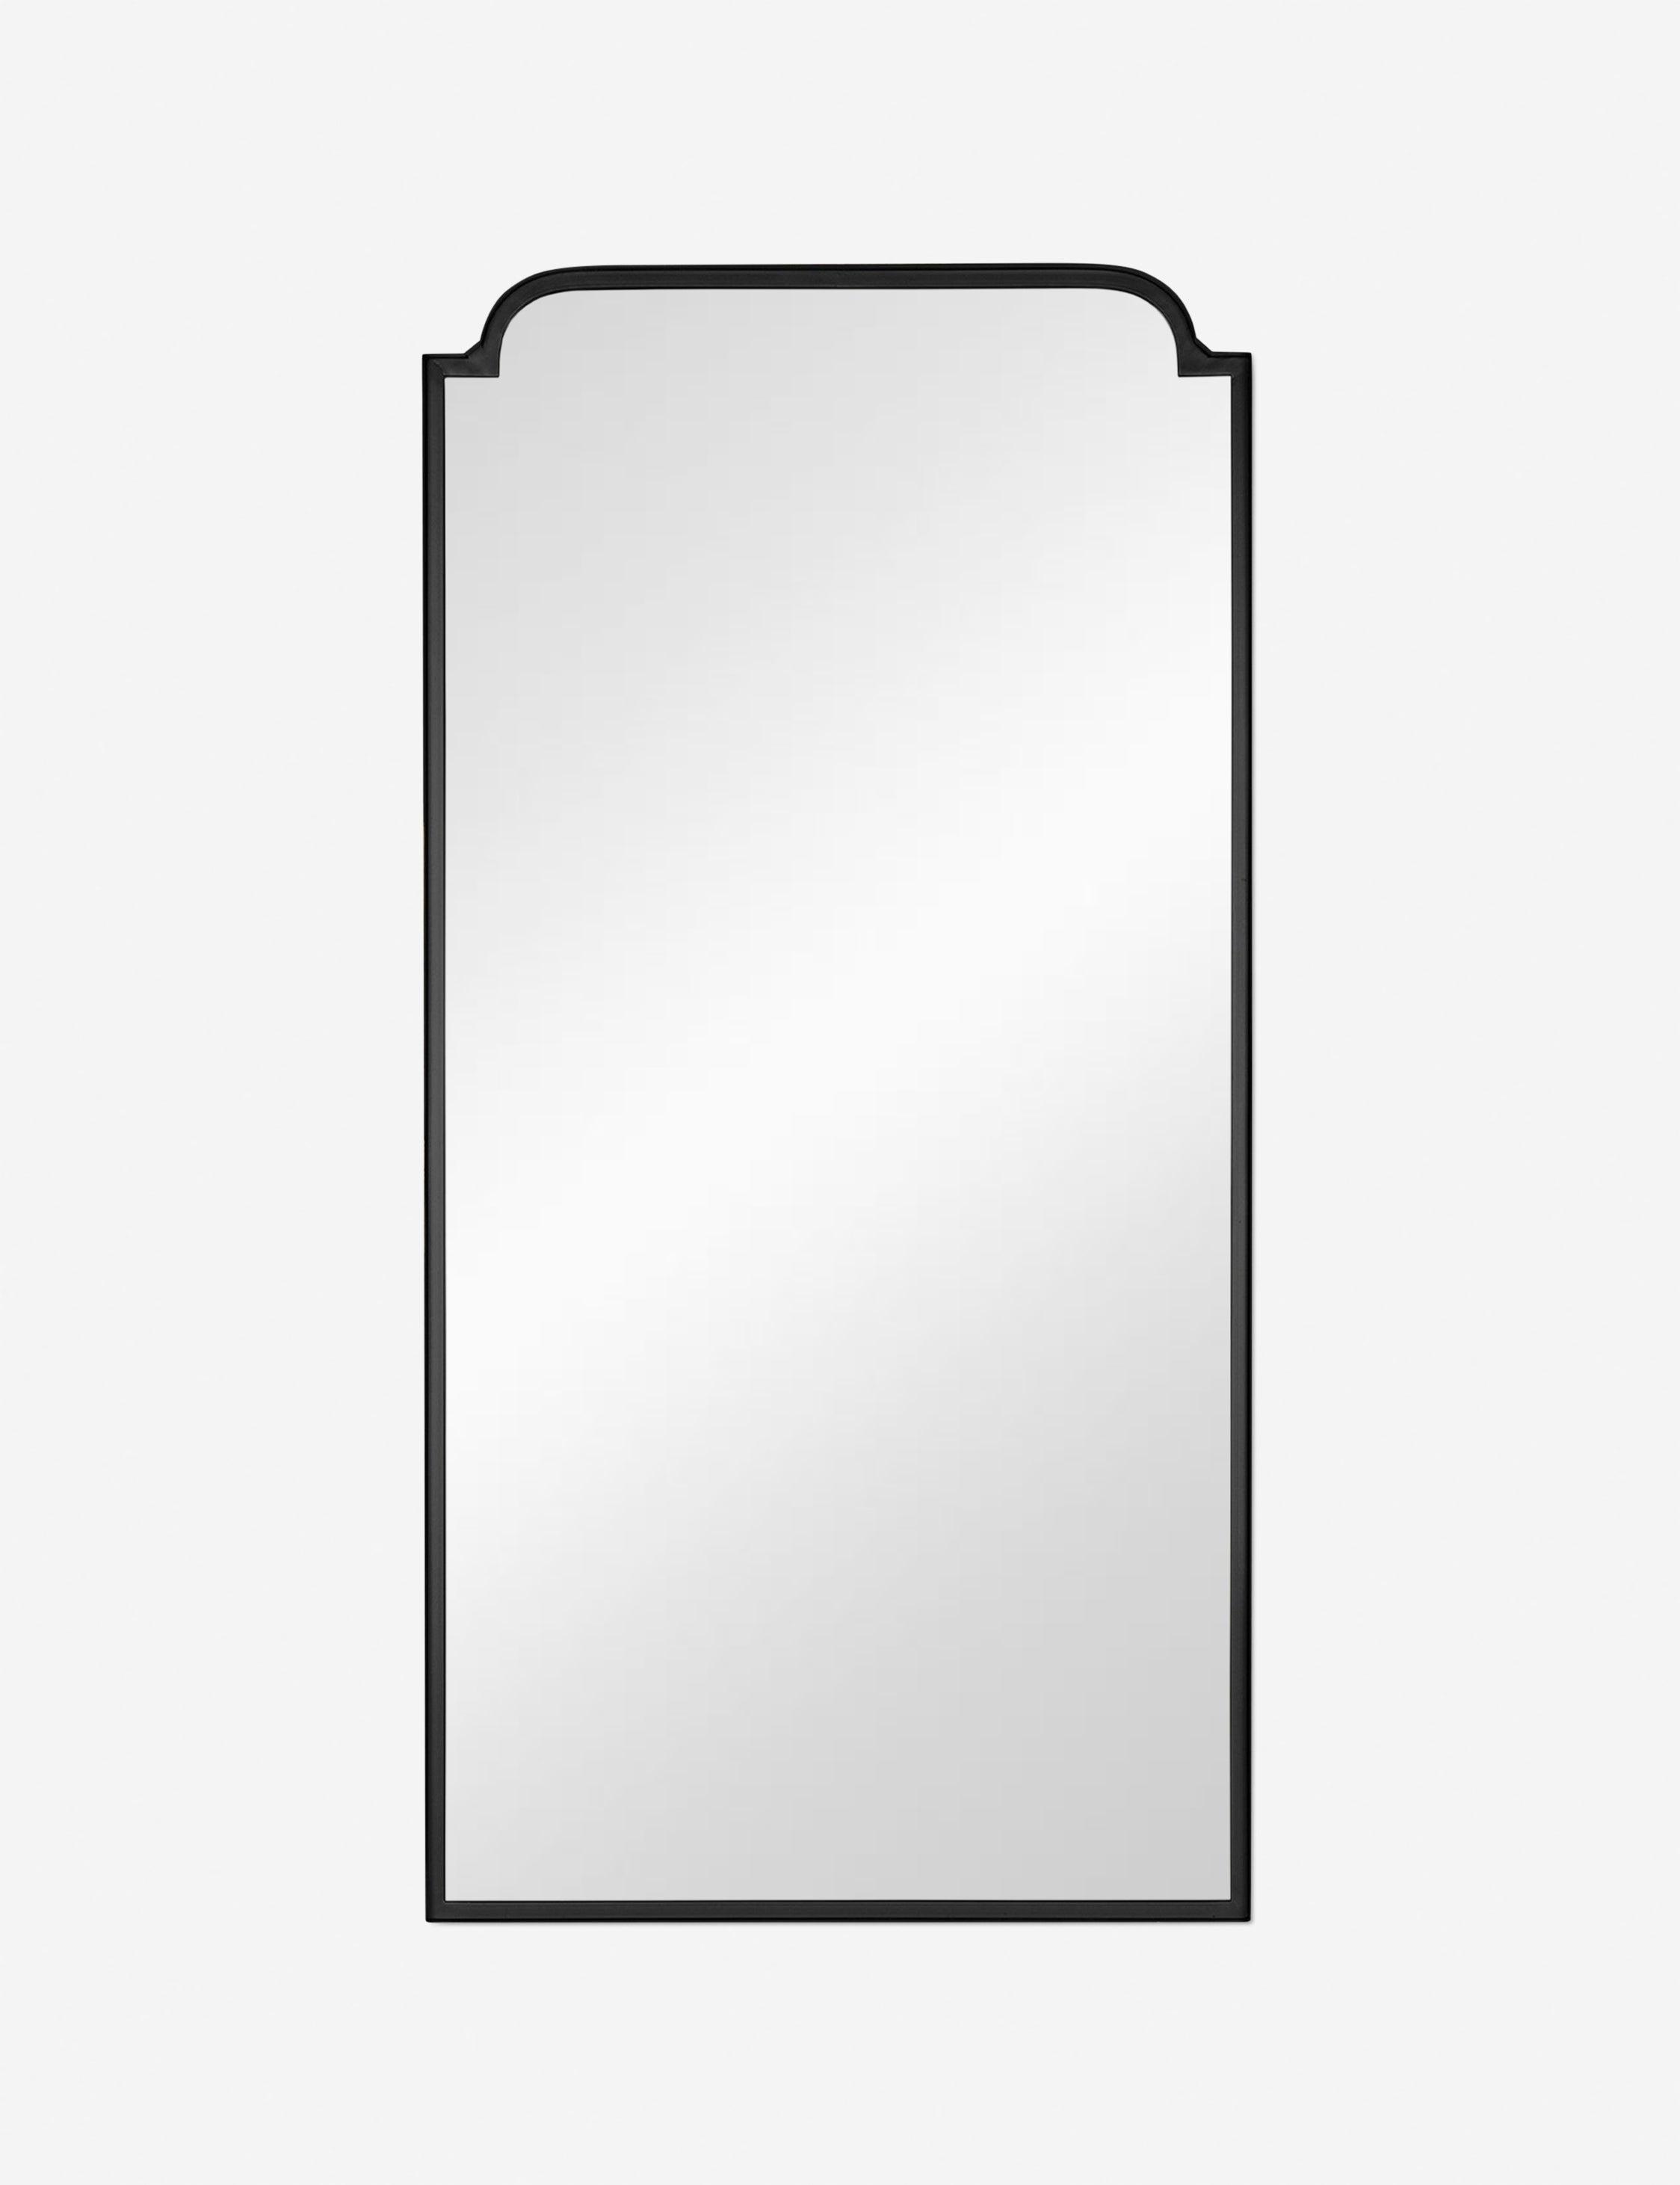 Elegant 47'' Rectangular Silver and Gold Wall Mirror